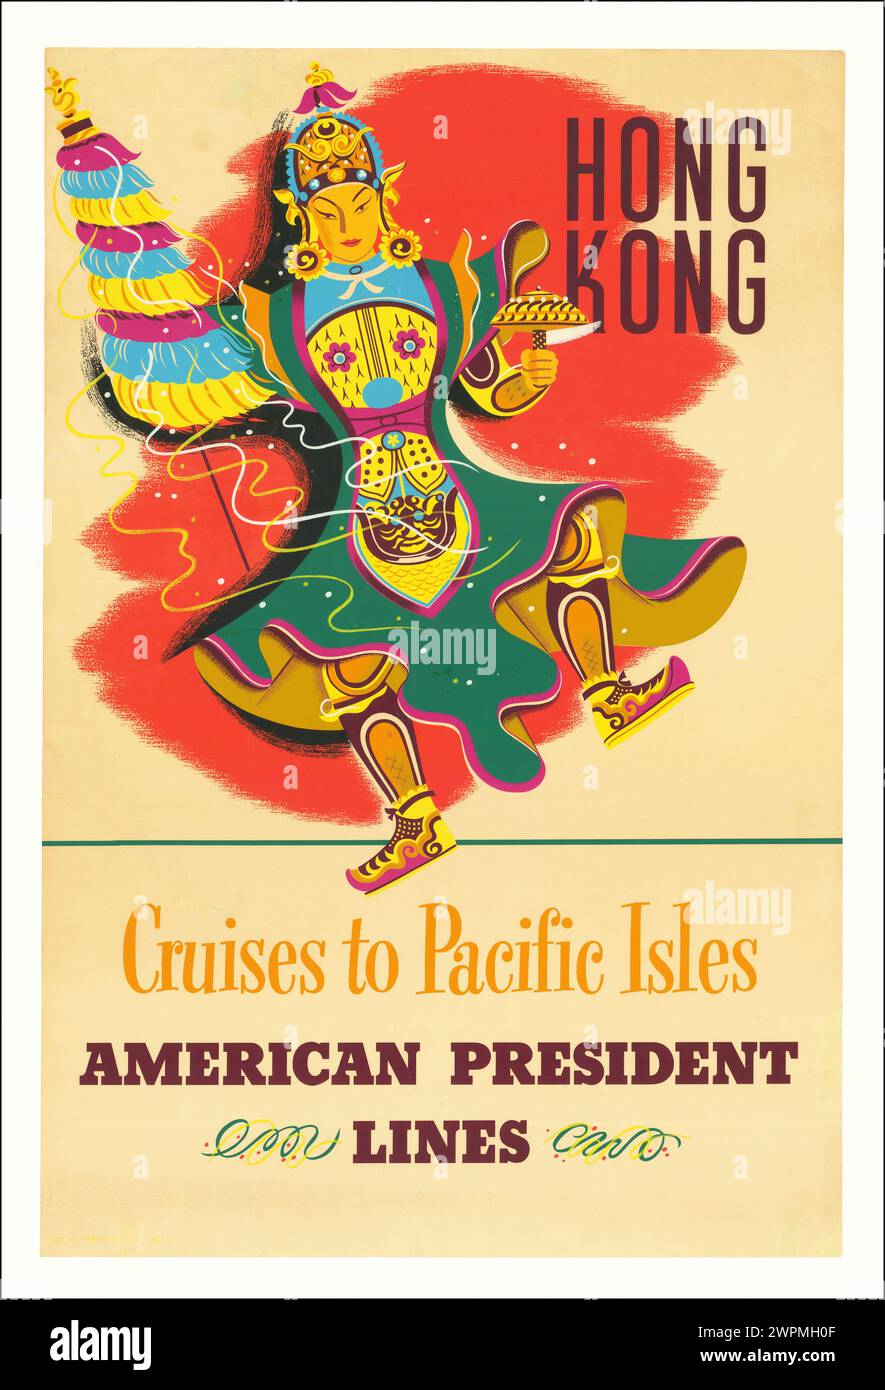 Affiche de voyage Aerican vintage. Hong Kong on American President Lines of Cruises. 1953 Banque D'Images